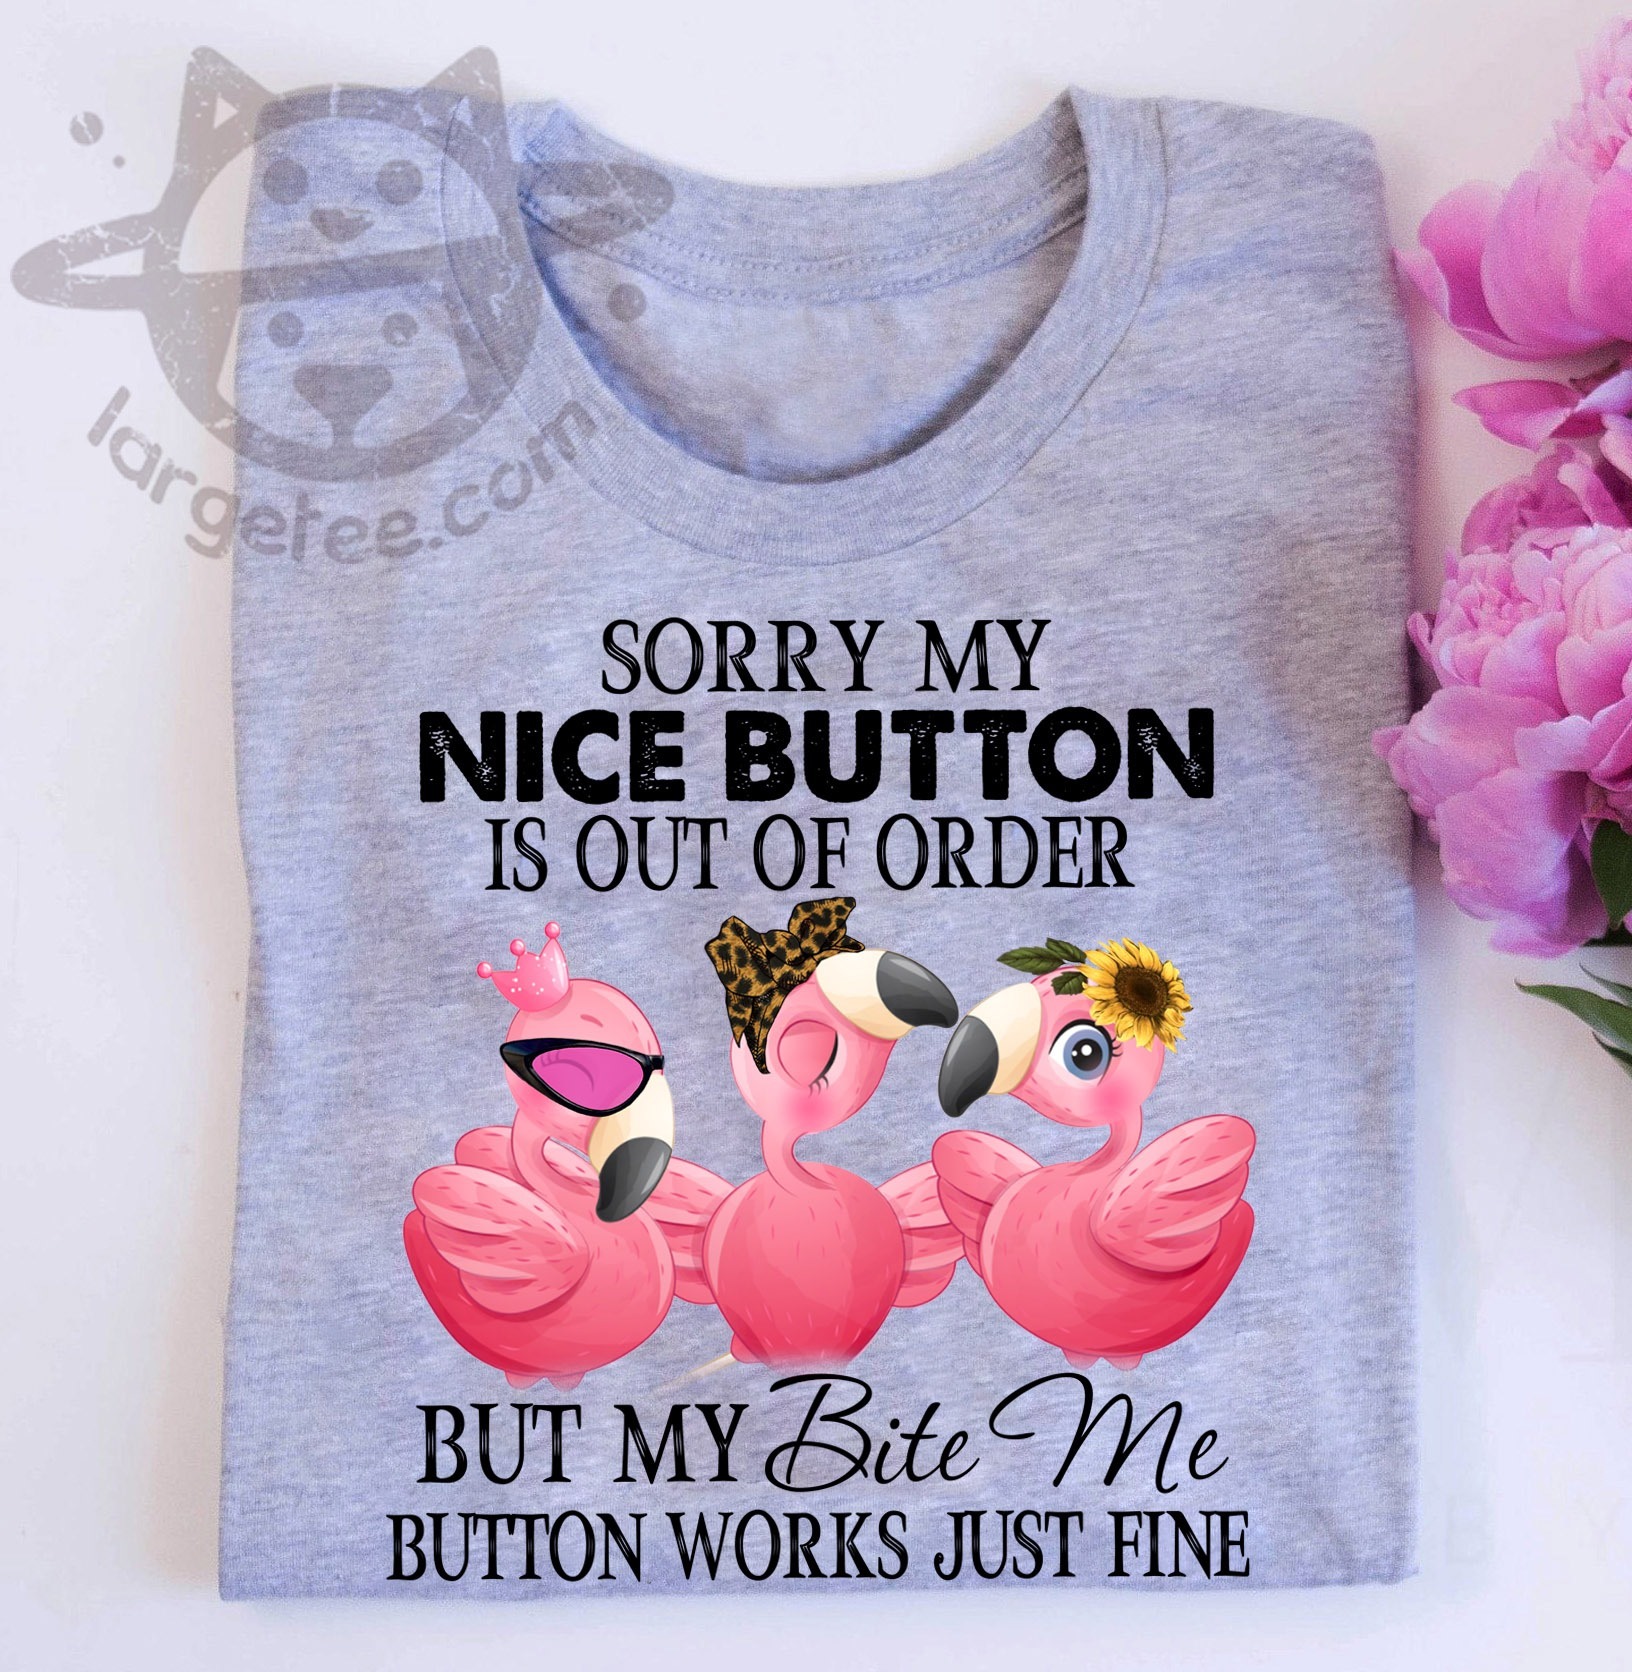 Sorry my nice button is out of order but my bite me button works just fine - Flamingo